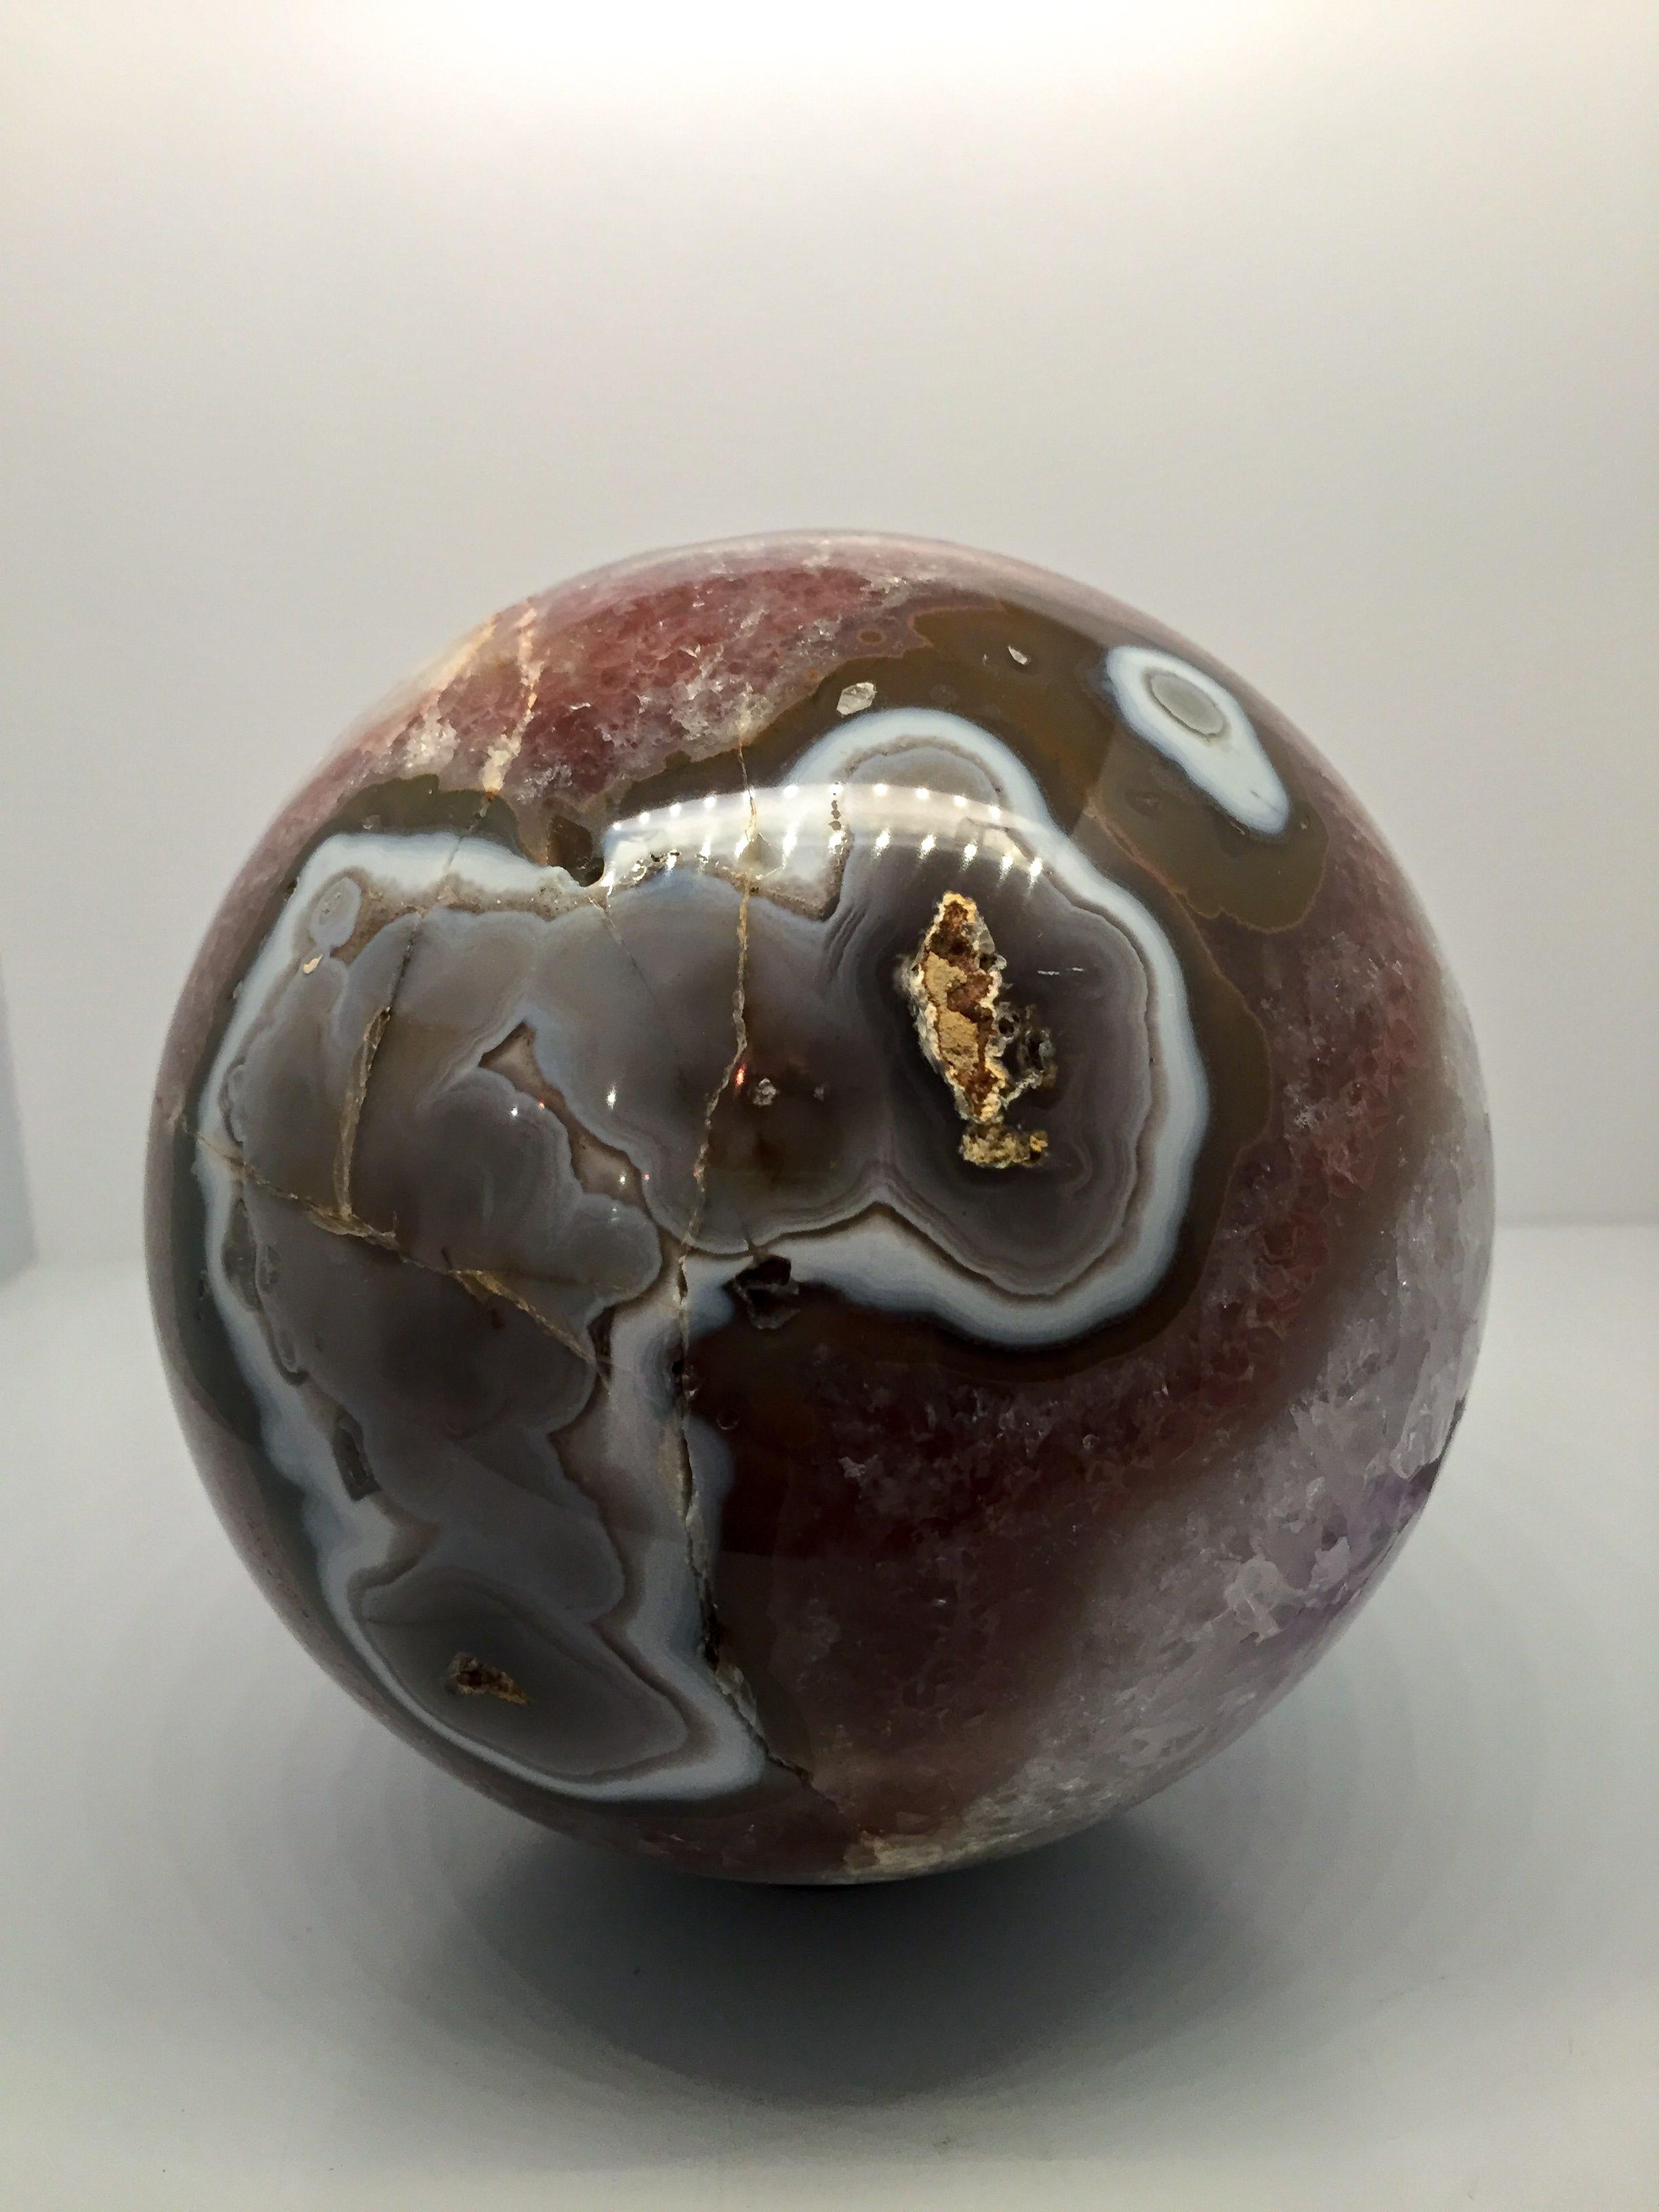 Brazilian Agate Specimen Mineral Sphere with Exposed Core